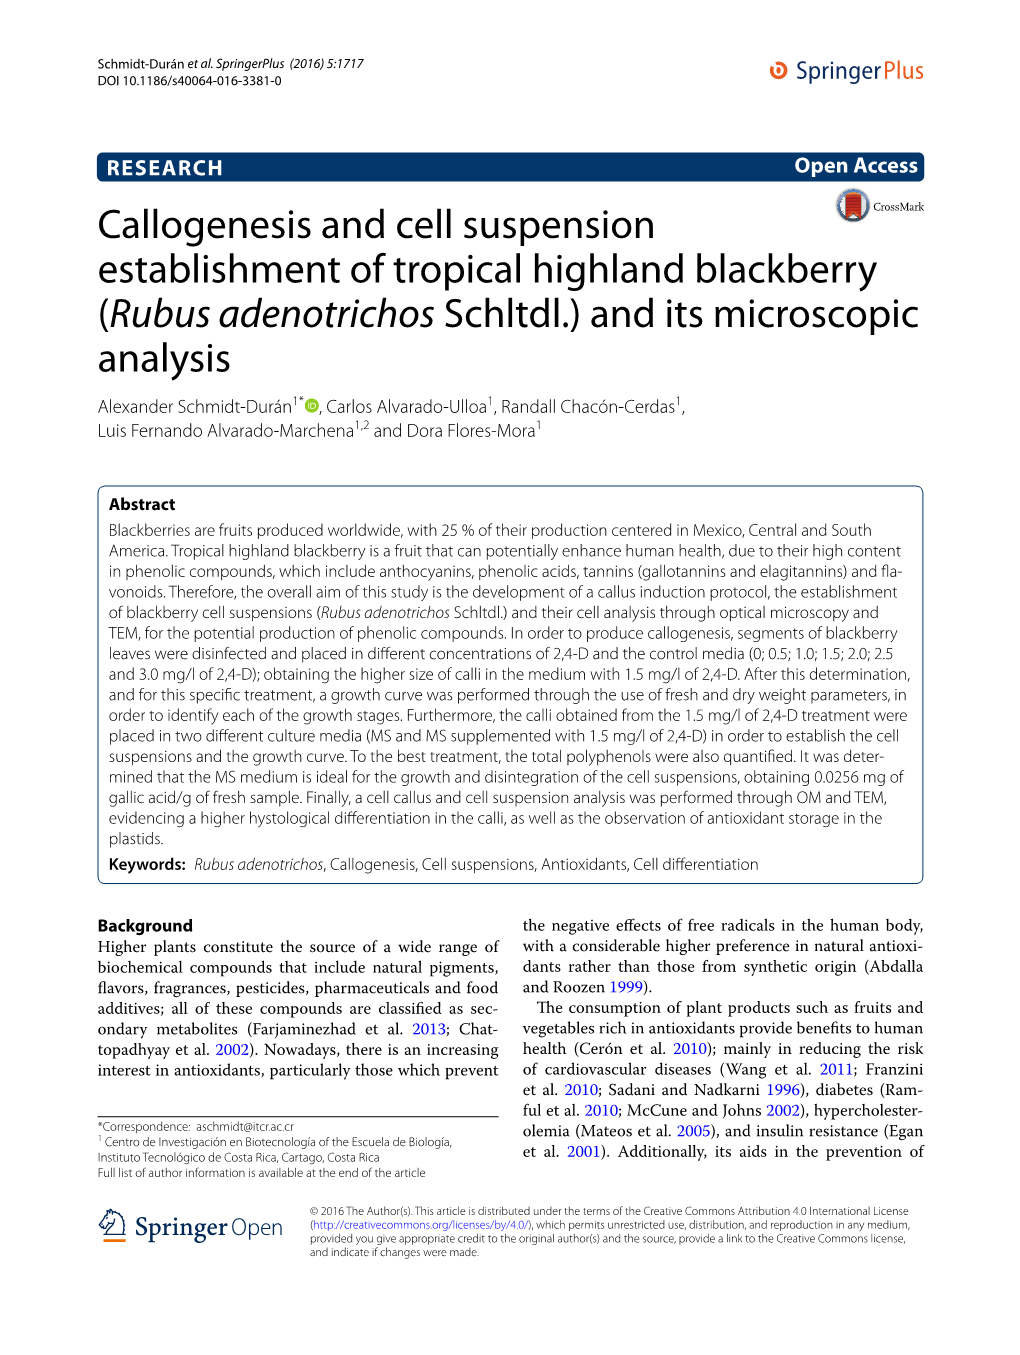 Callogenesis and Cell Suspension Establishment of Tropical Highland